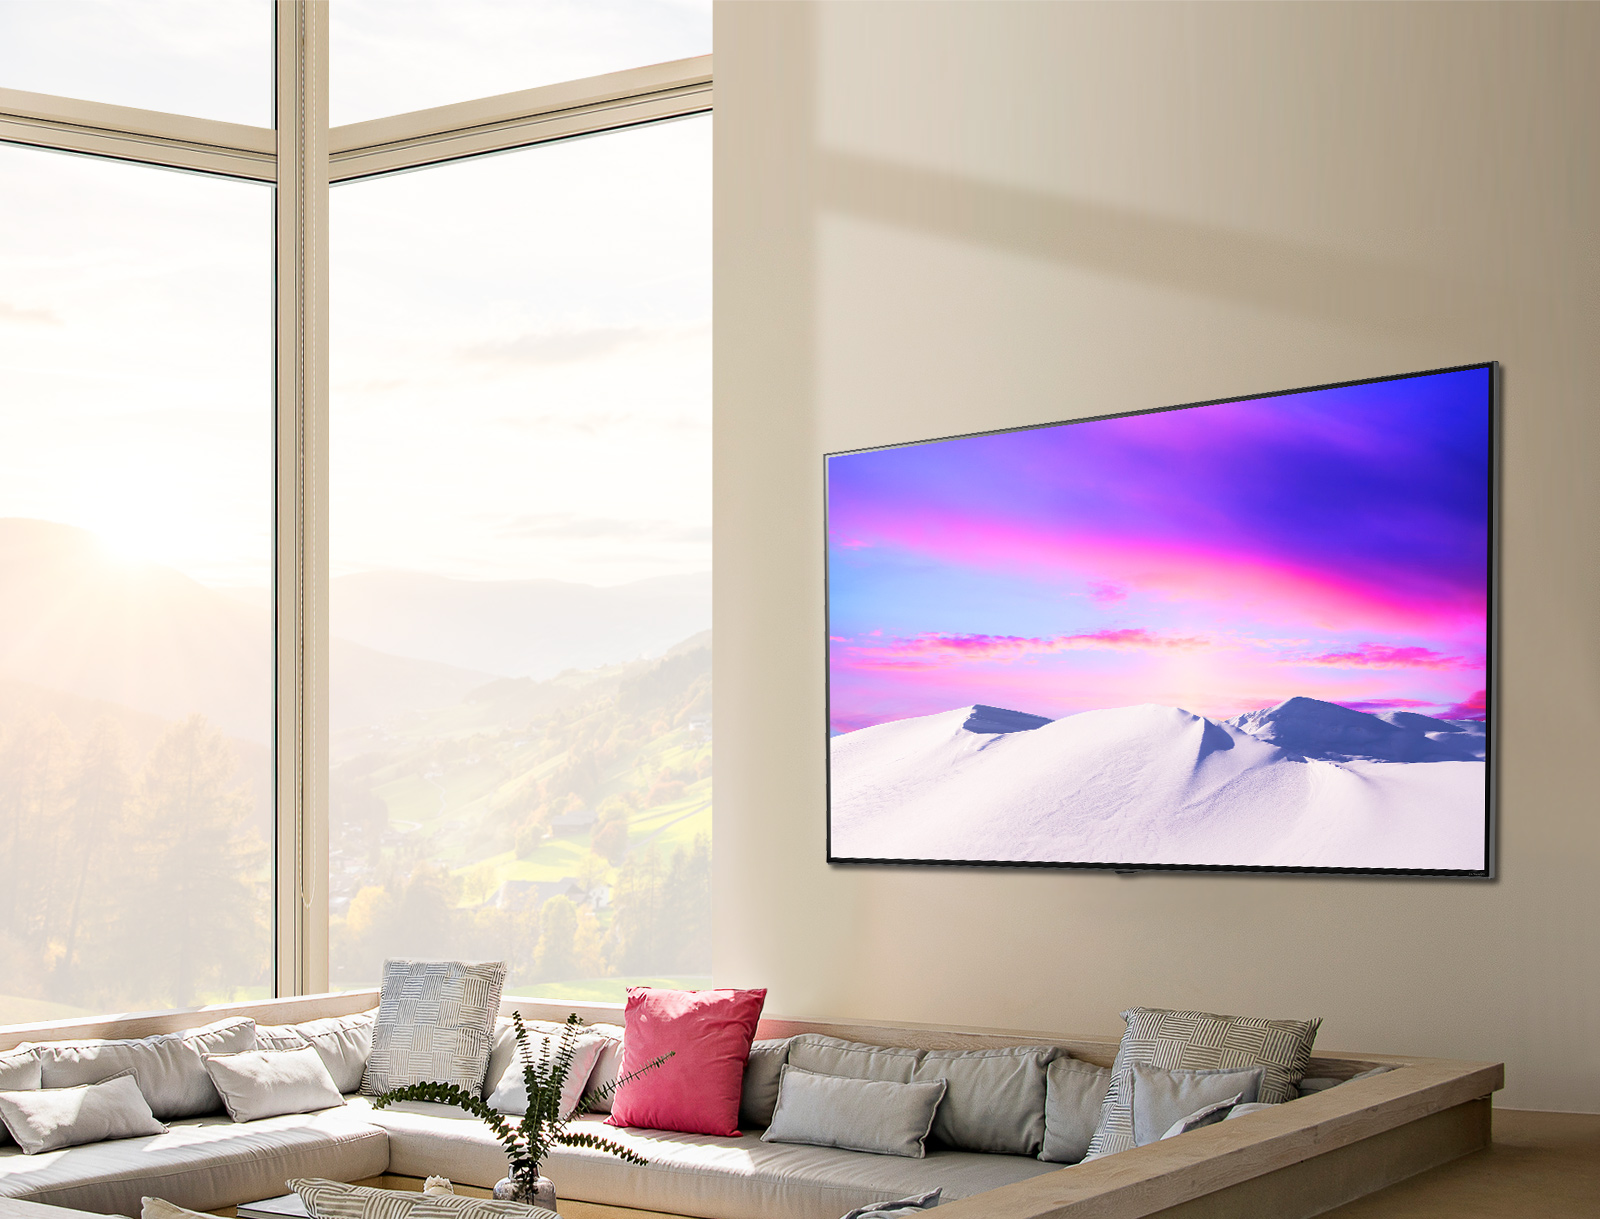 A shot showing a thin LG NanoCell TV mounted on a wall.